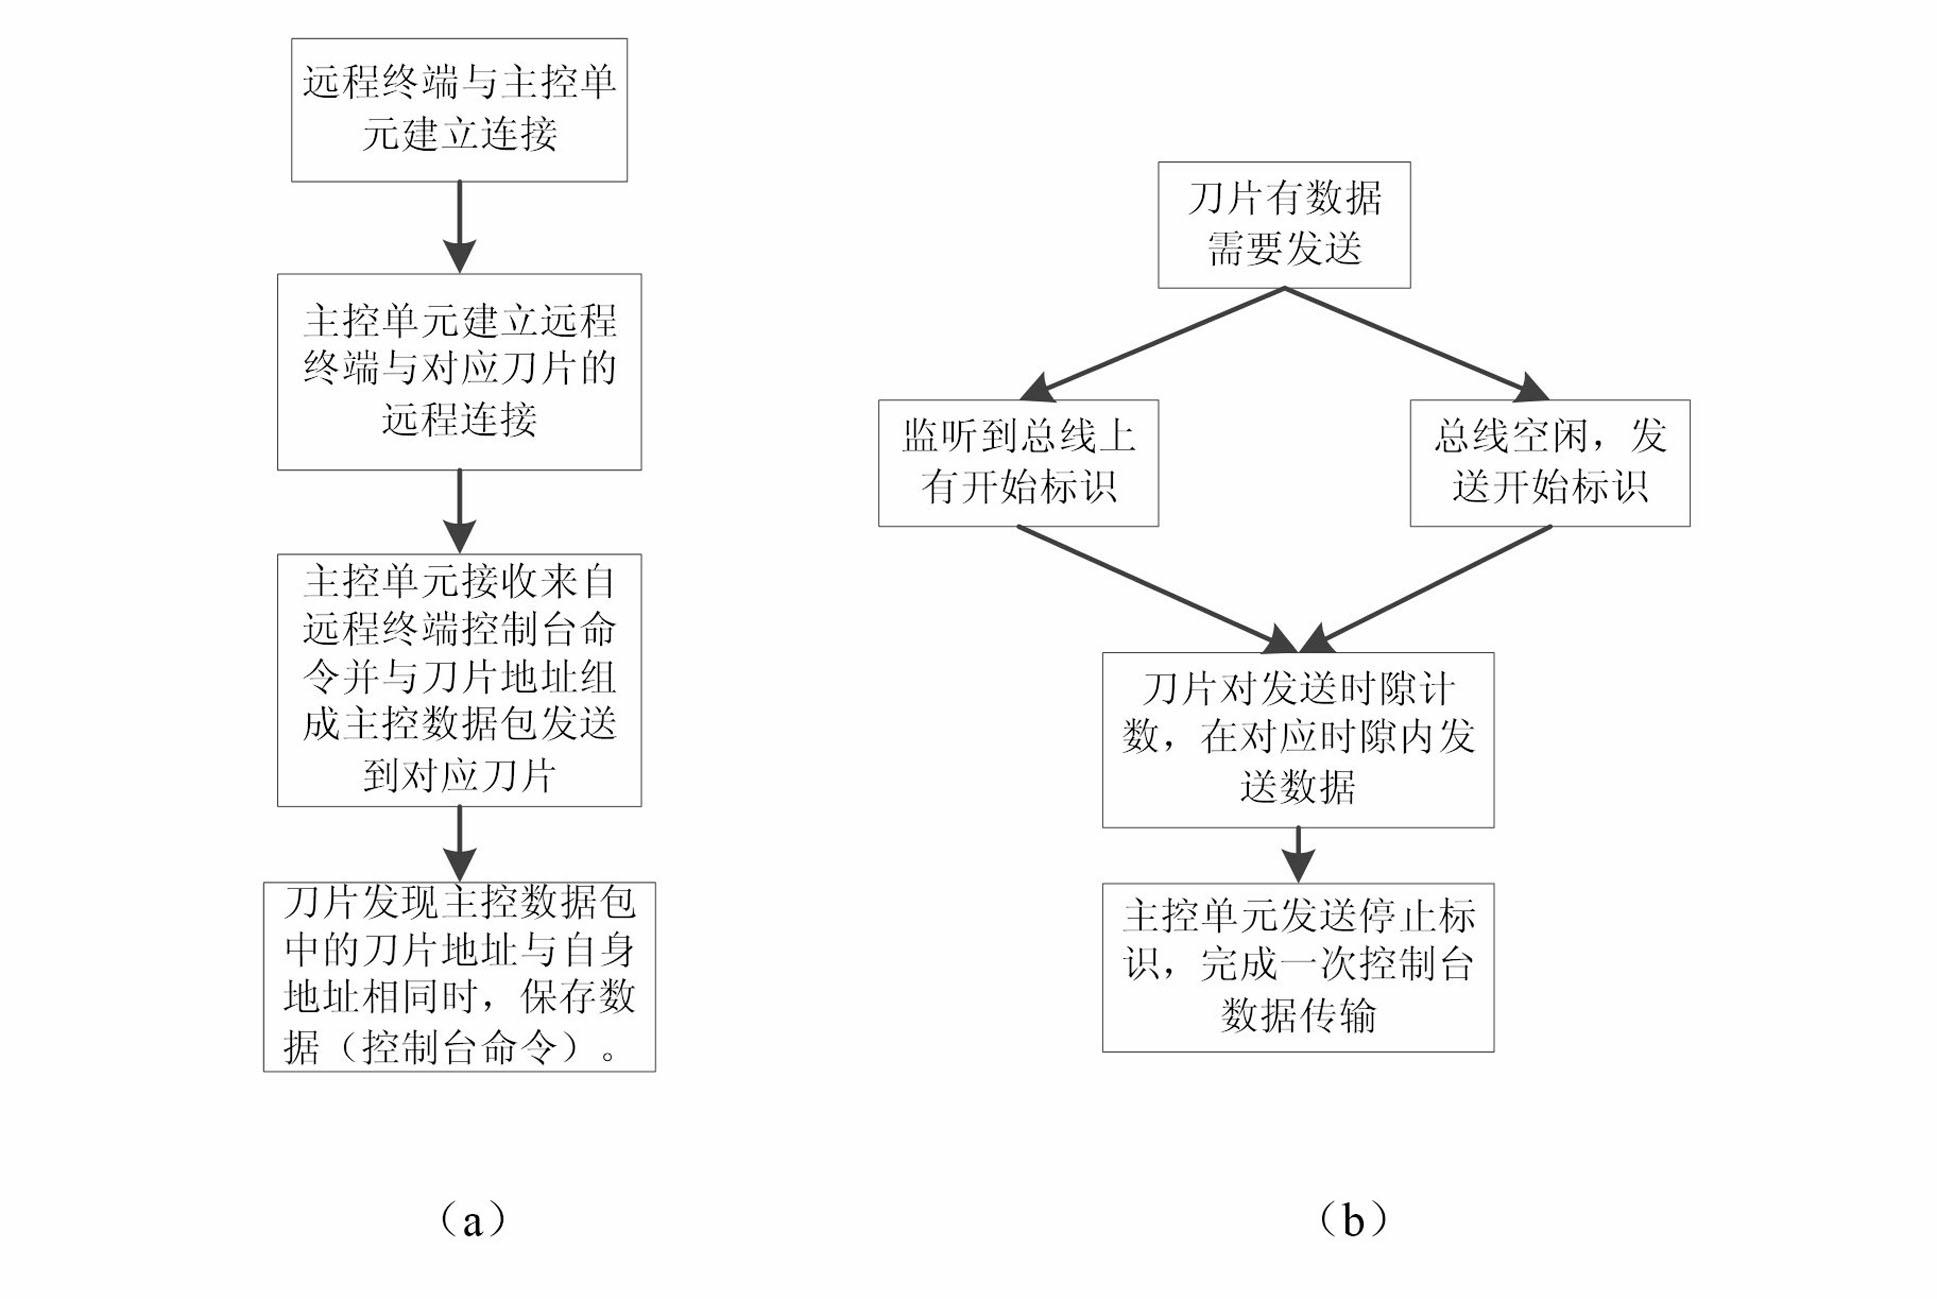 Blade server control method and console